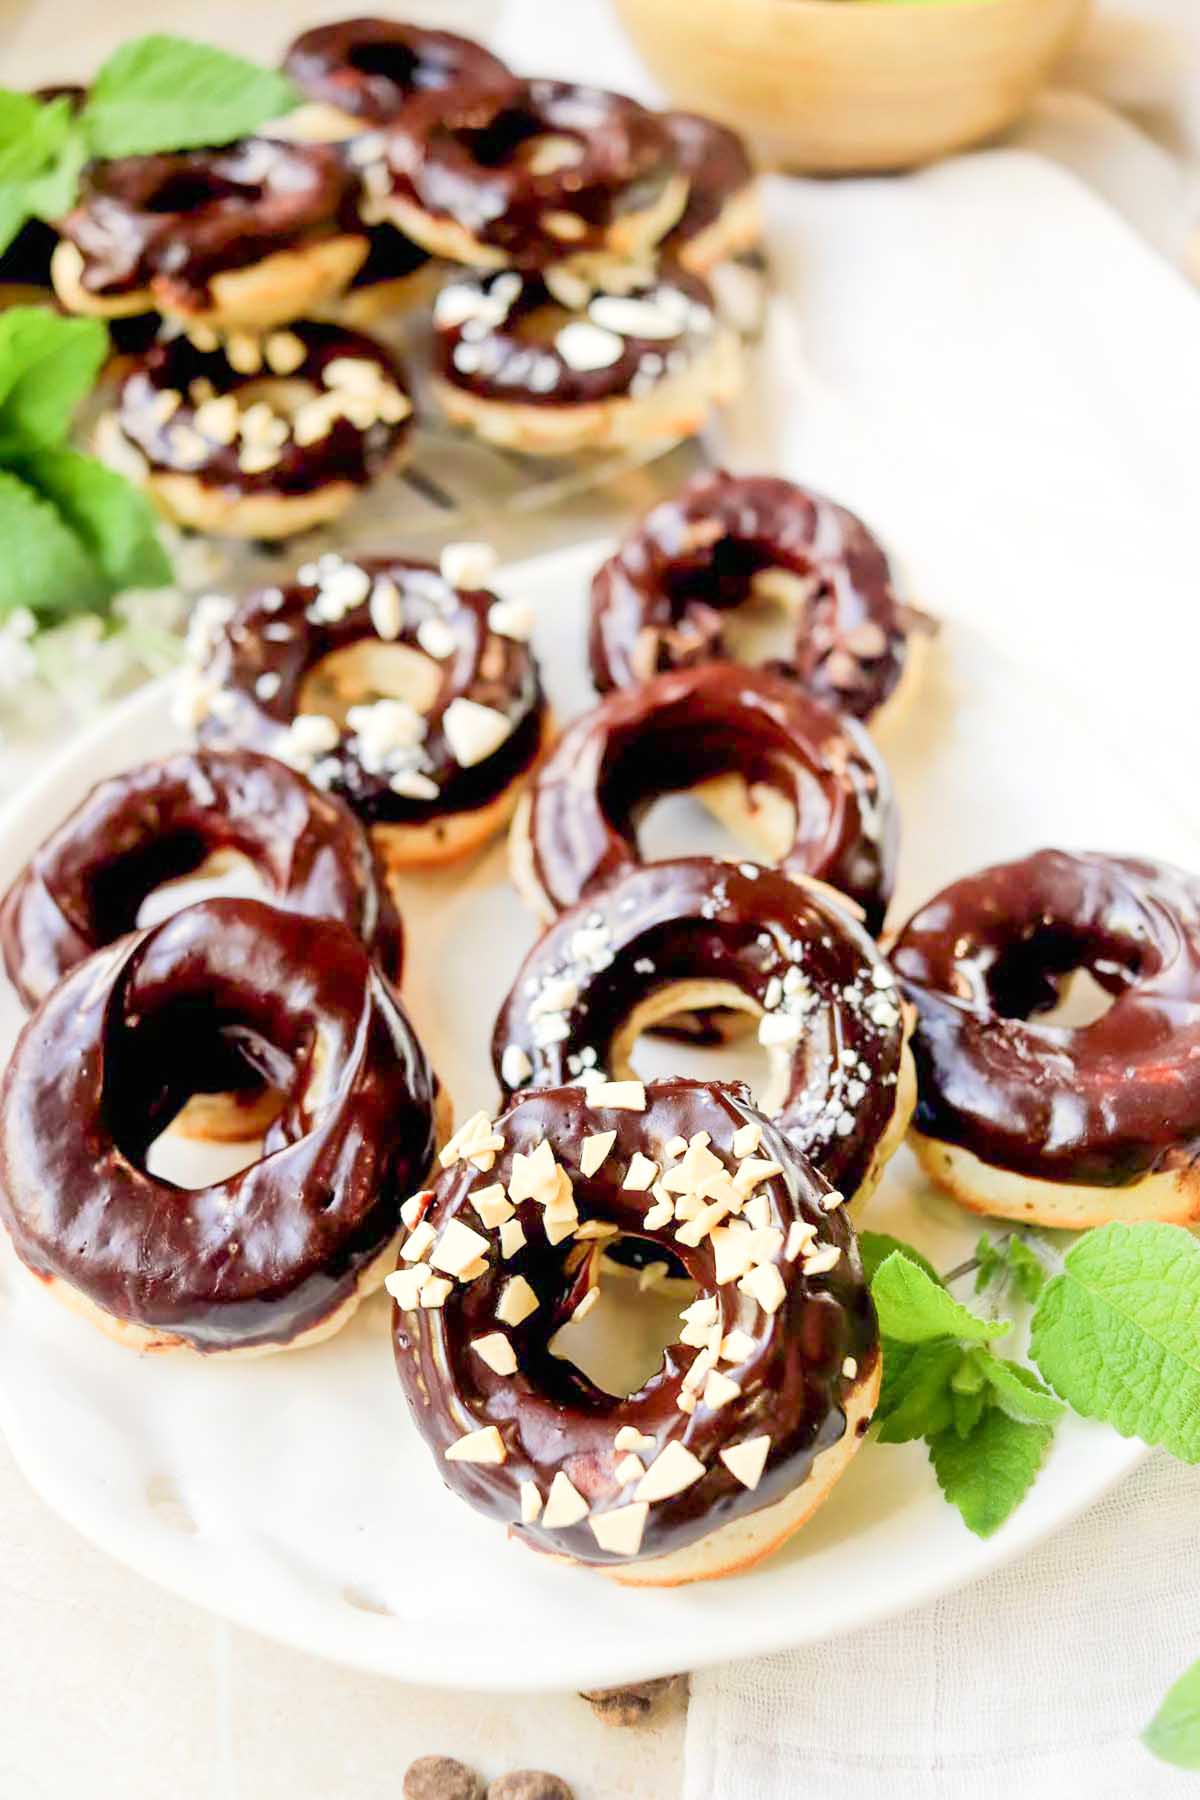 Chocolate frosted donuts on a white plate.